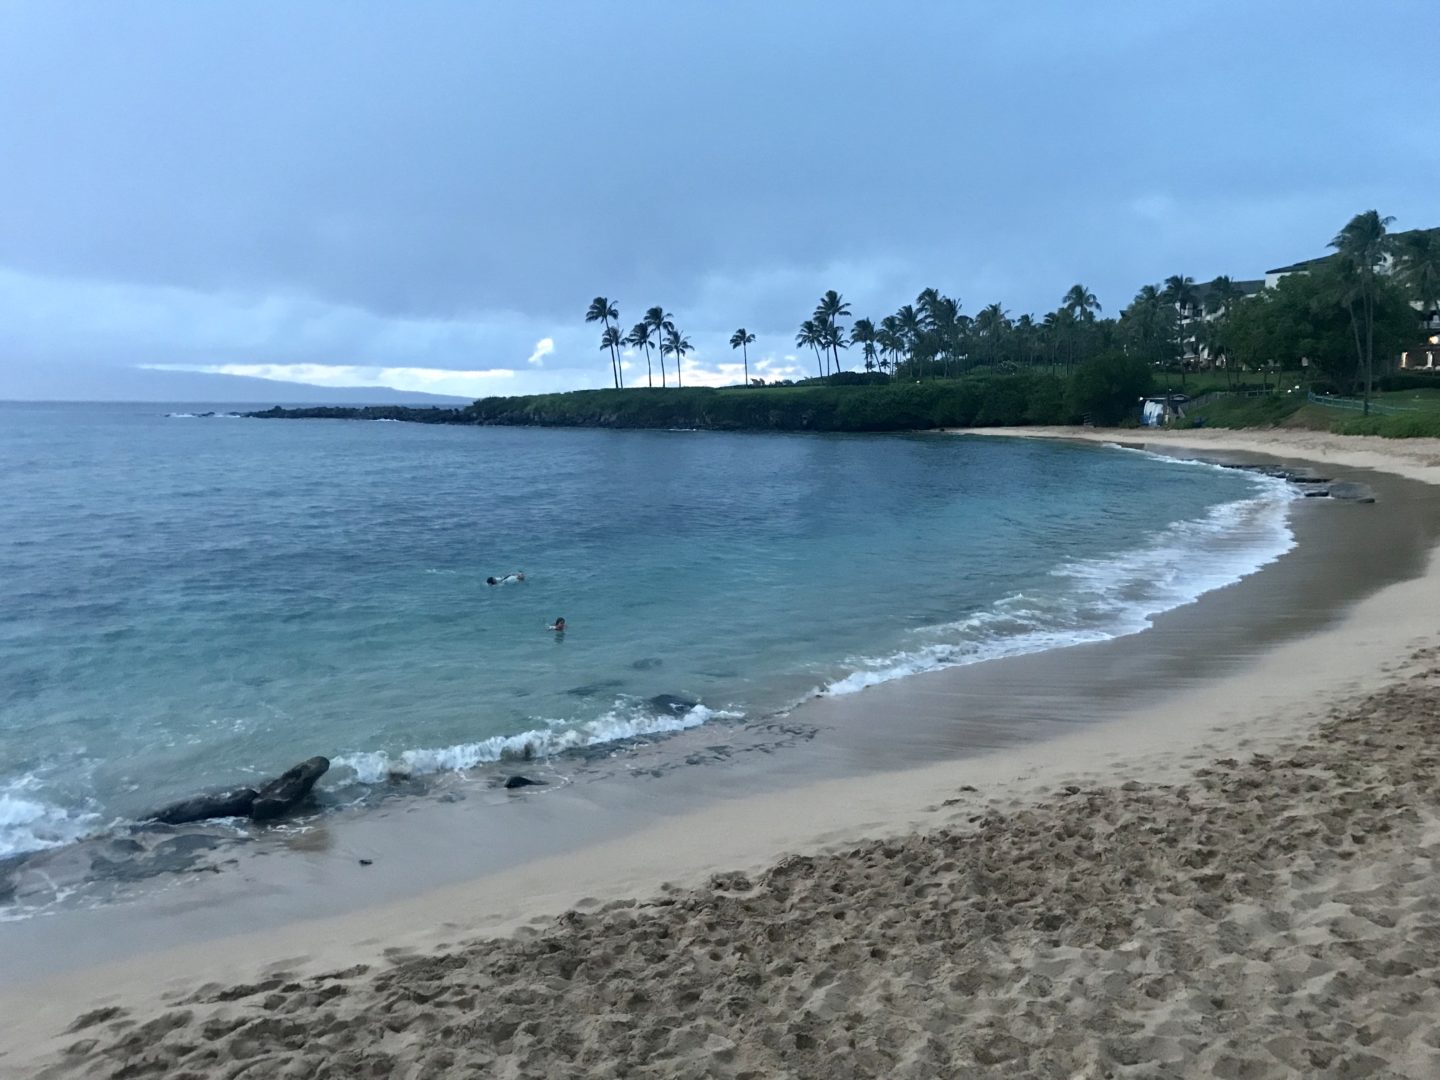 Kapalua Bay Beach was named the best in the world! It’s gorgeous water and soft sand helped contribute to this award-winning status. 